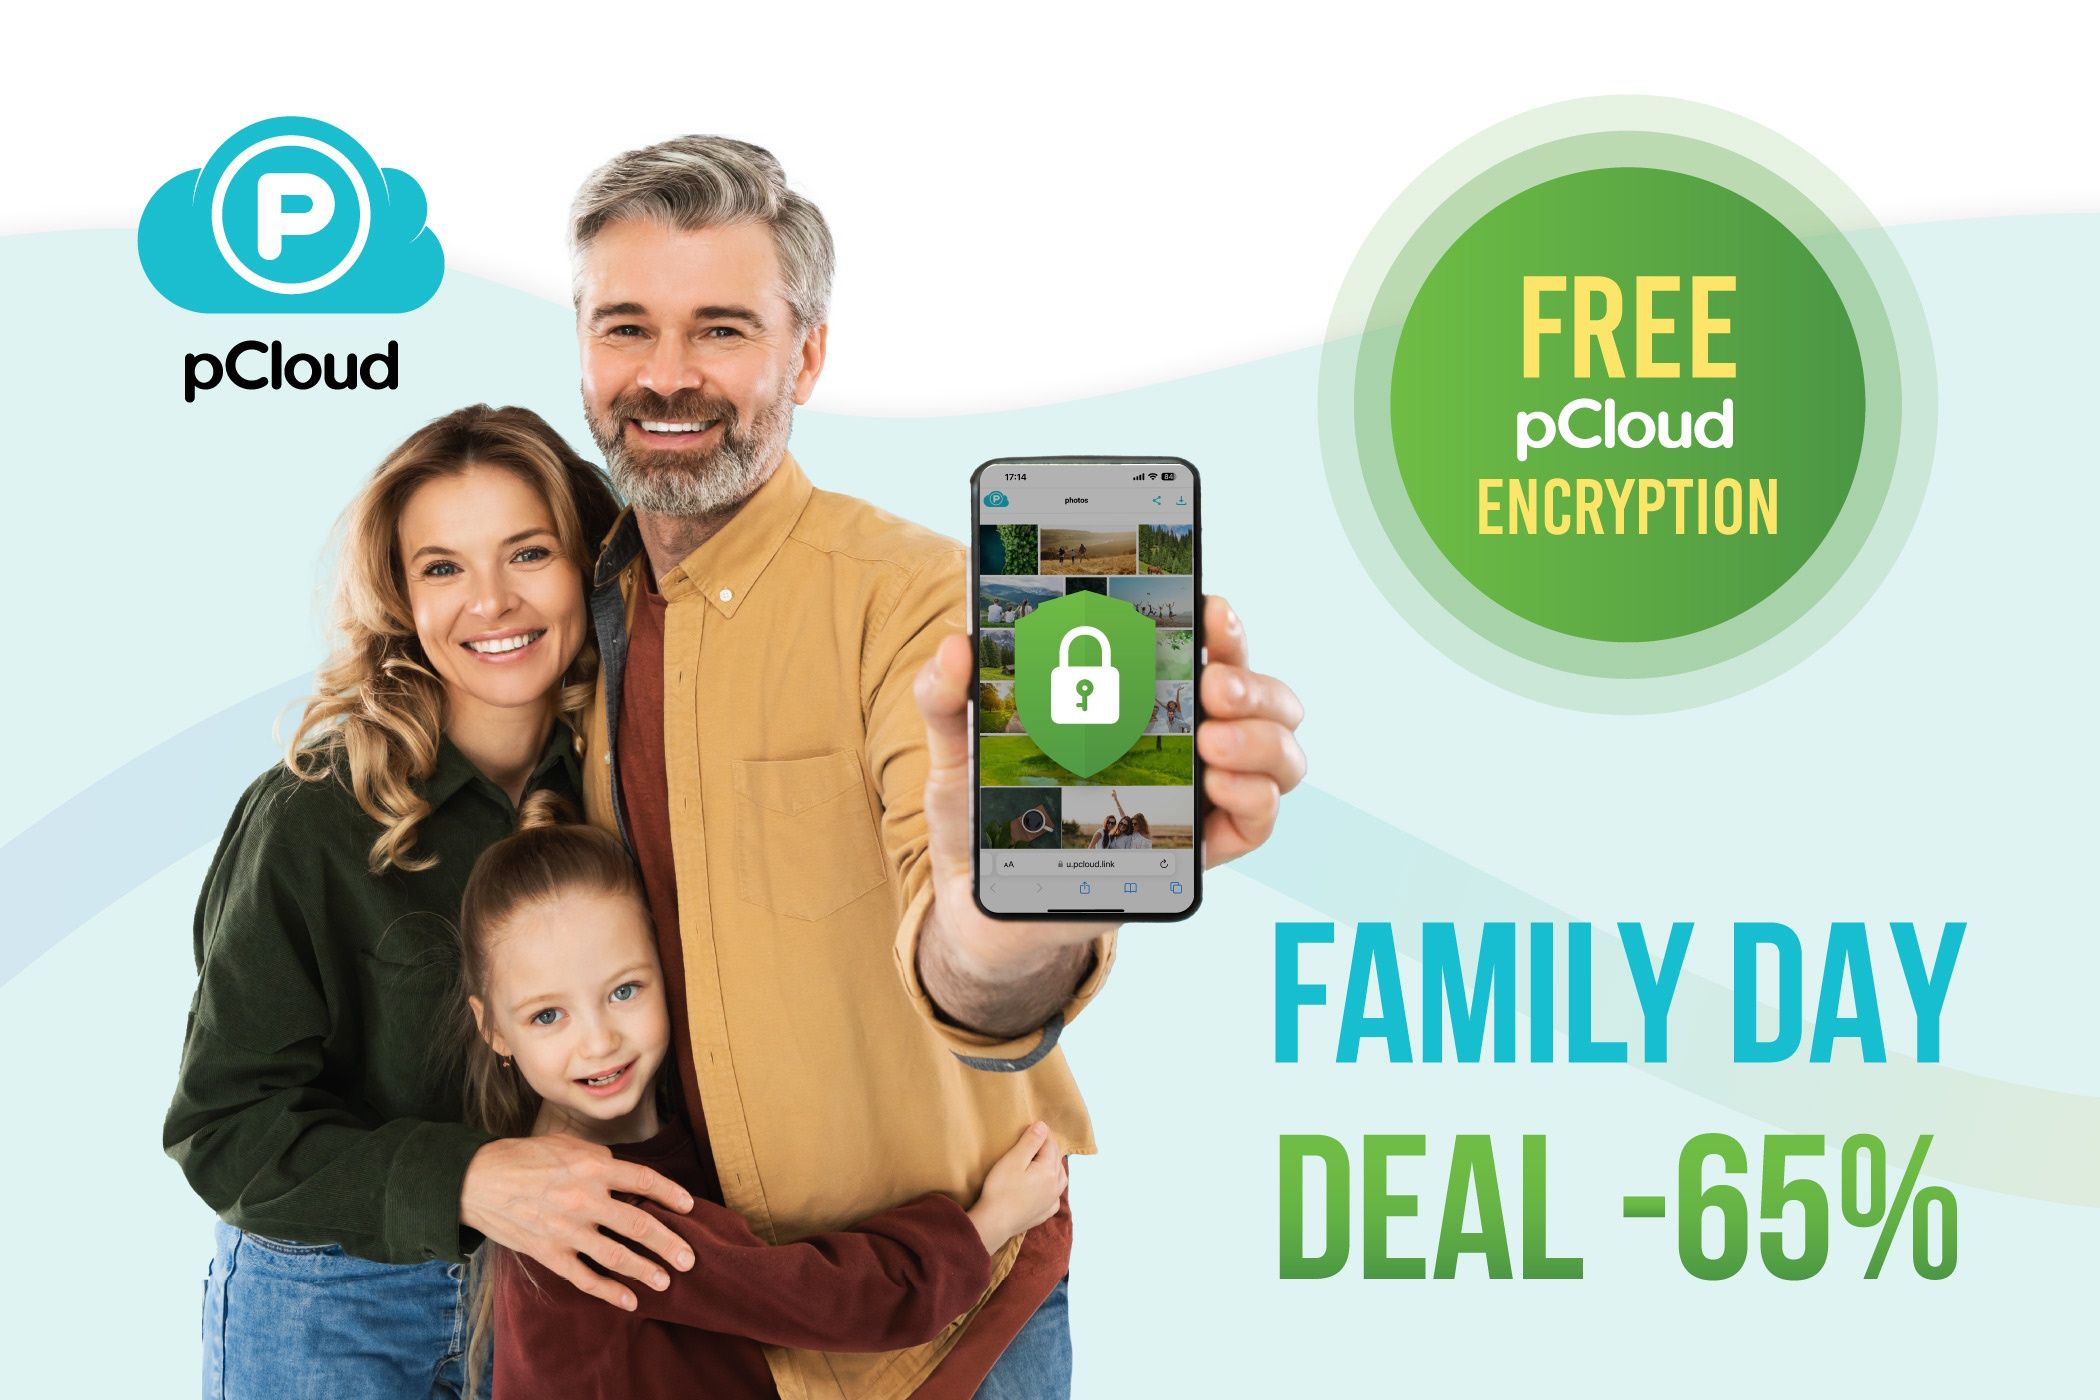 pcloud family day deal with 65% off, family holding phone